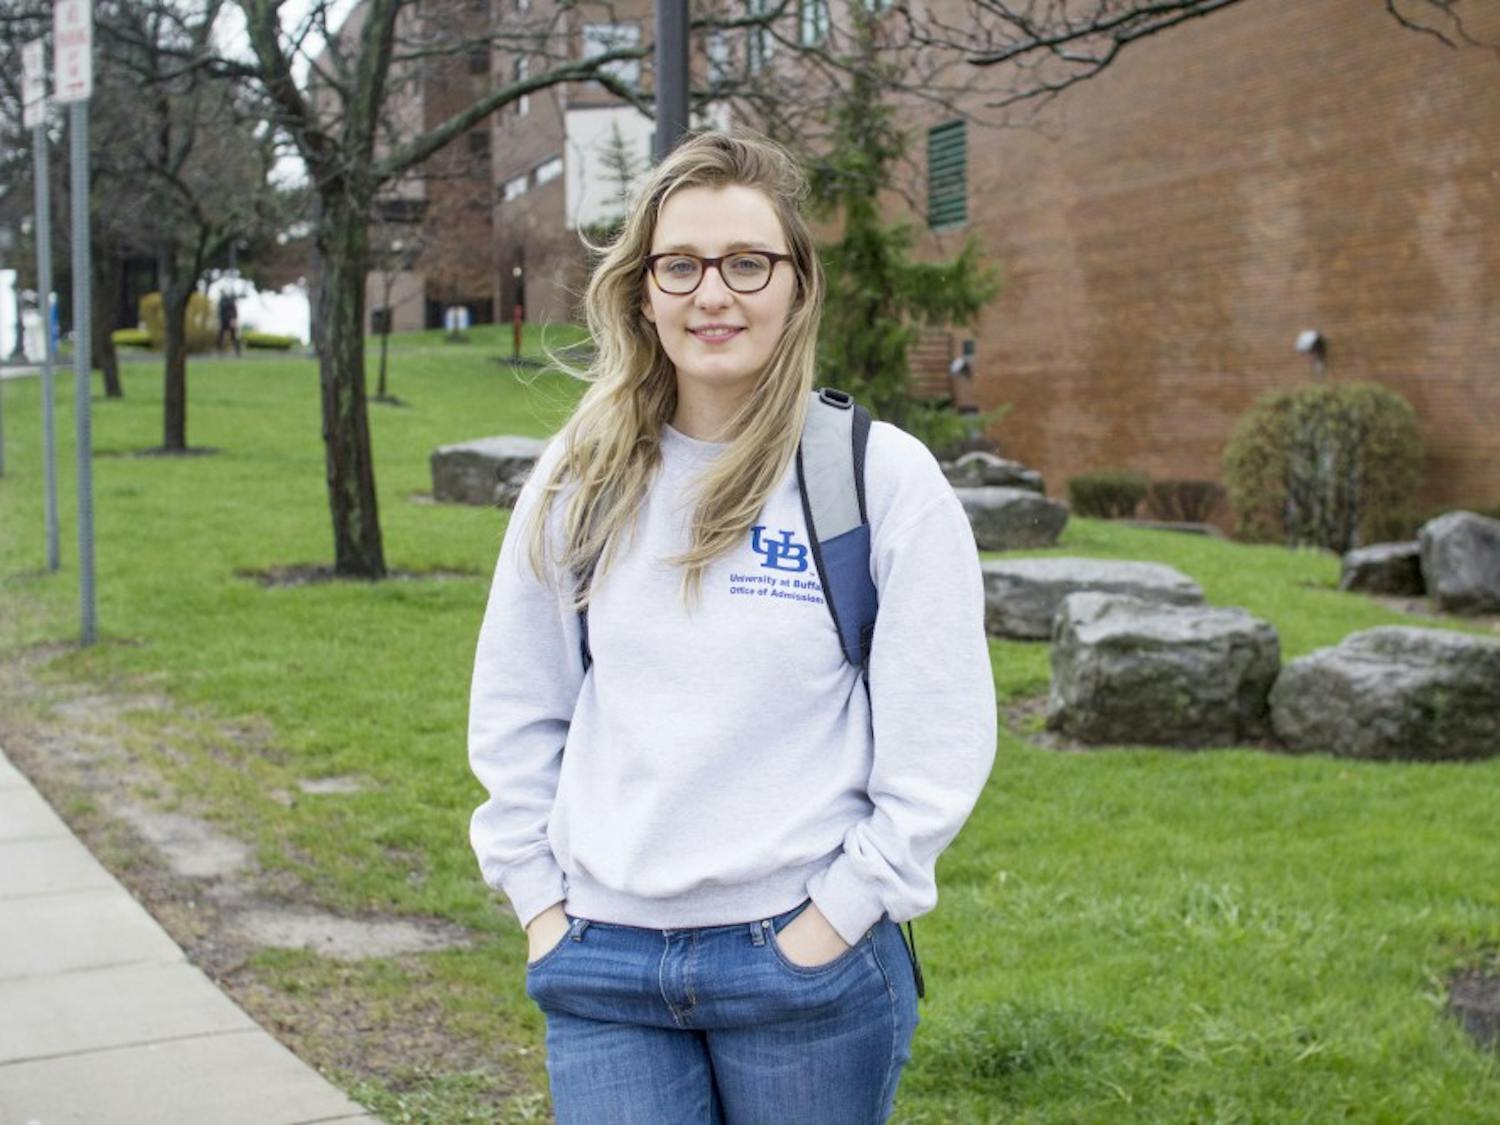 Kaitlin Halligan (pictured)&nbsp;brought the “Meatless Mondays” pledge to UB to encourage students to stop eating meat once a week.